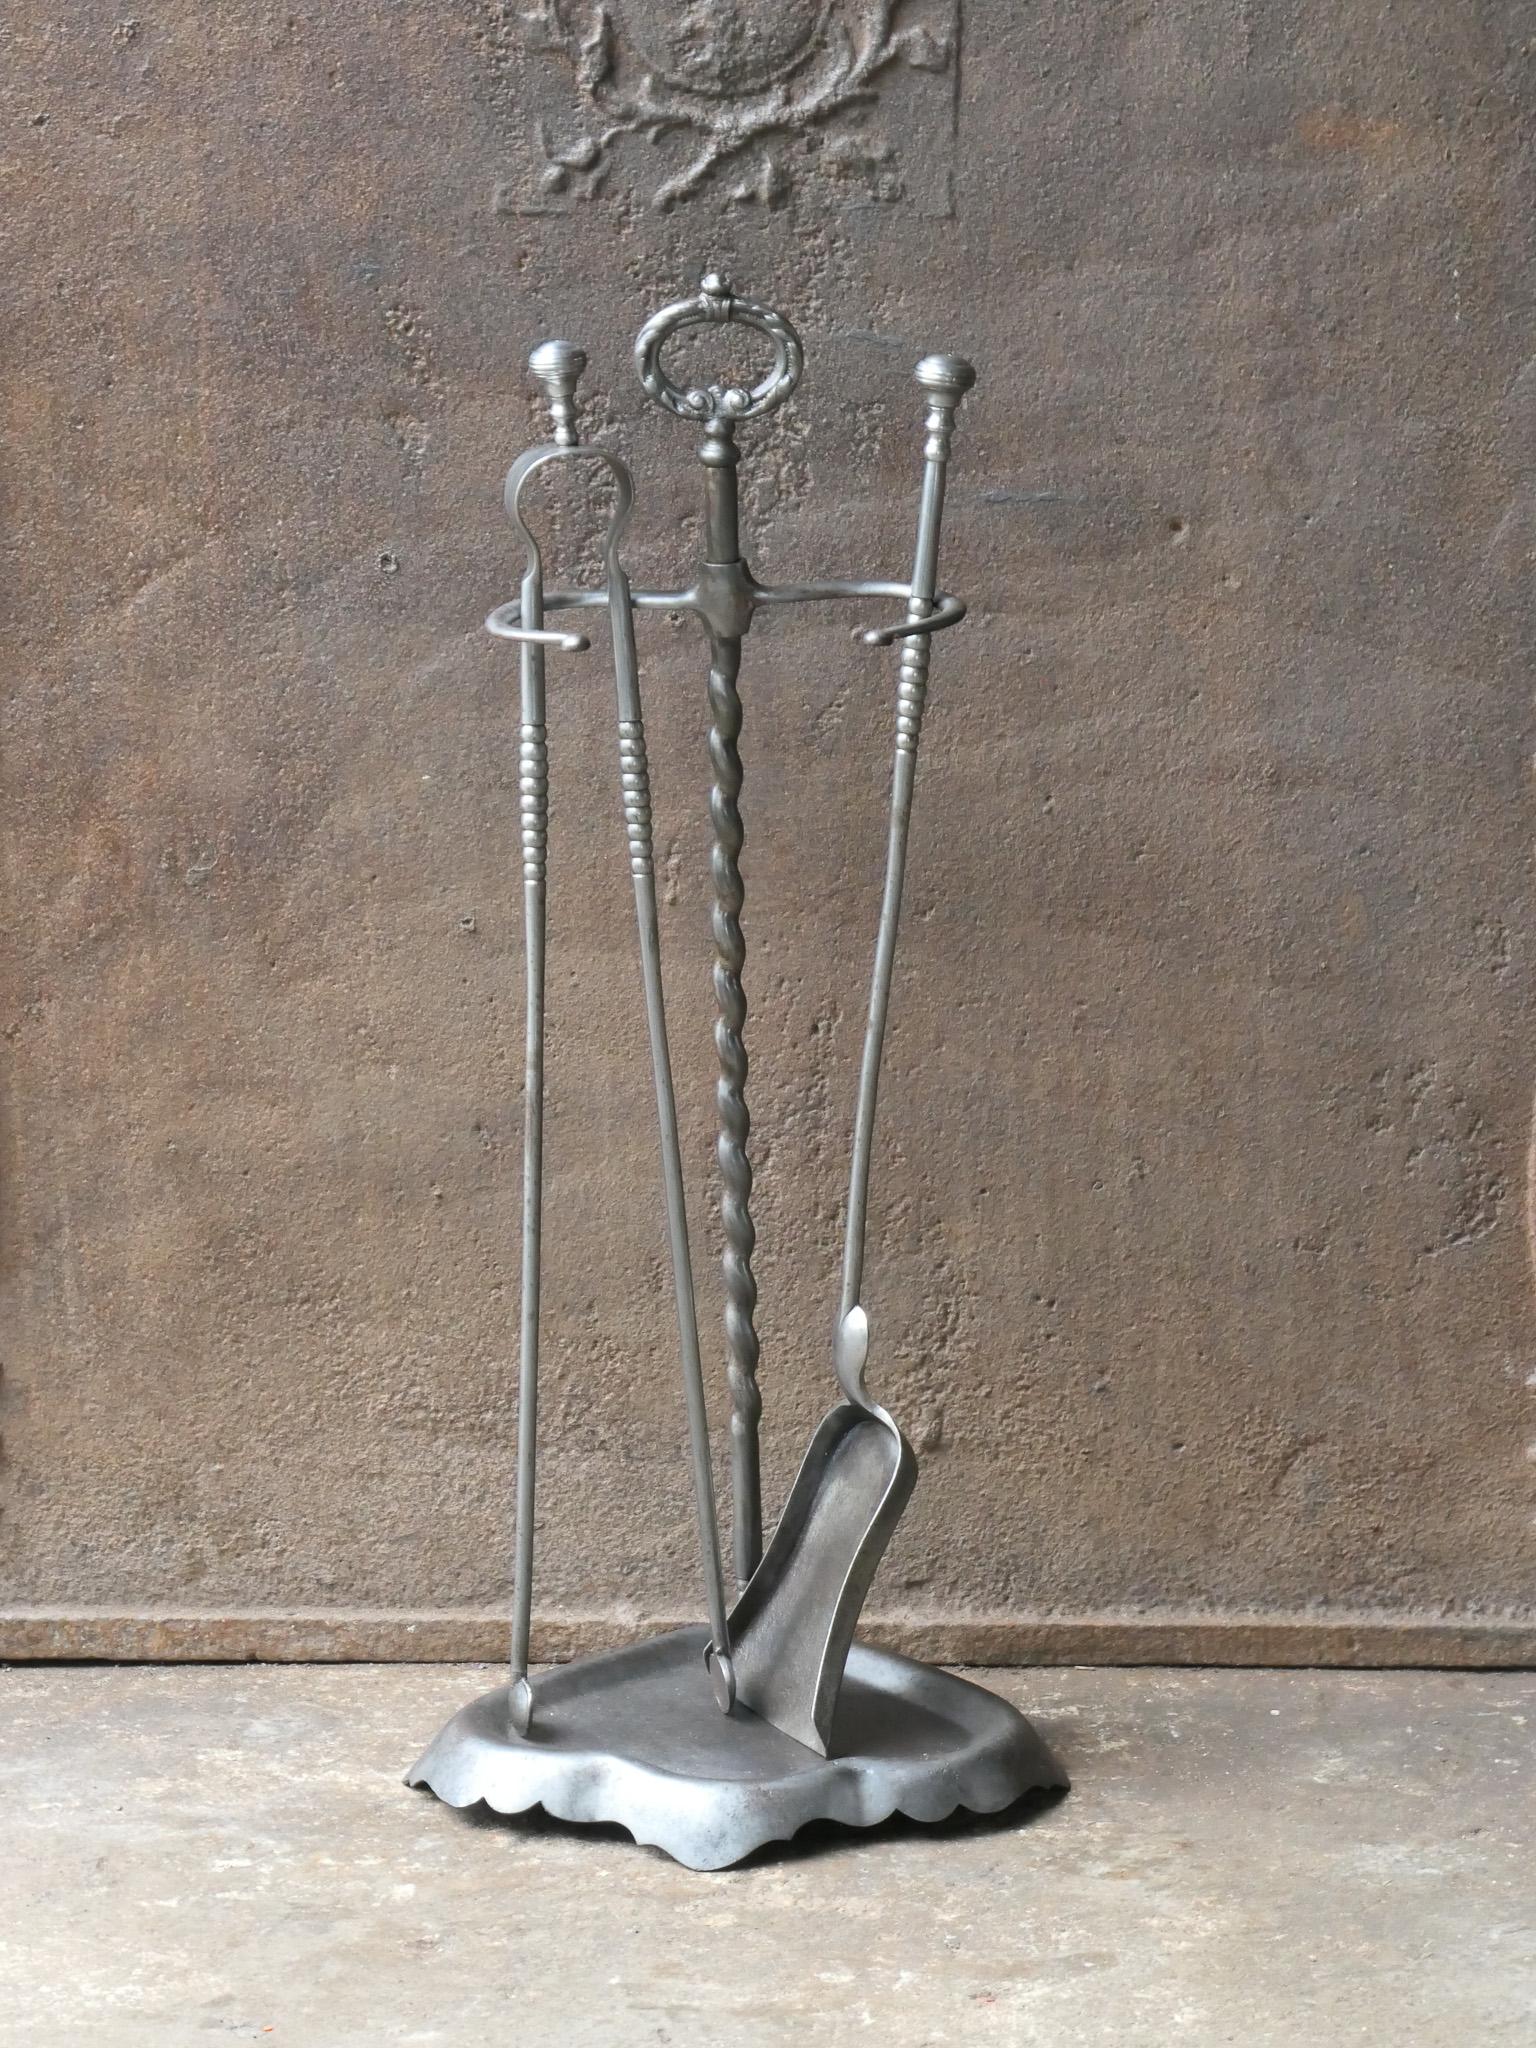 19th century French fireplace tool set. Napoleon III period. The tool set consists of tongs, shovel, and a stand. The tool set is hand forged and made of wrought iron. The set is in a good condition. Fit for use in the fireplace.